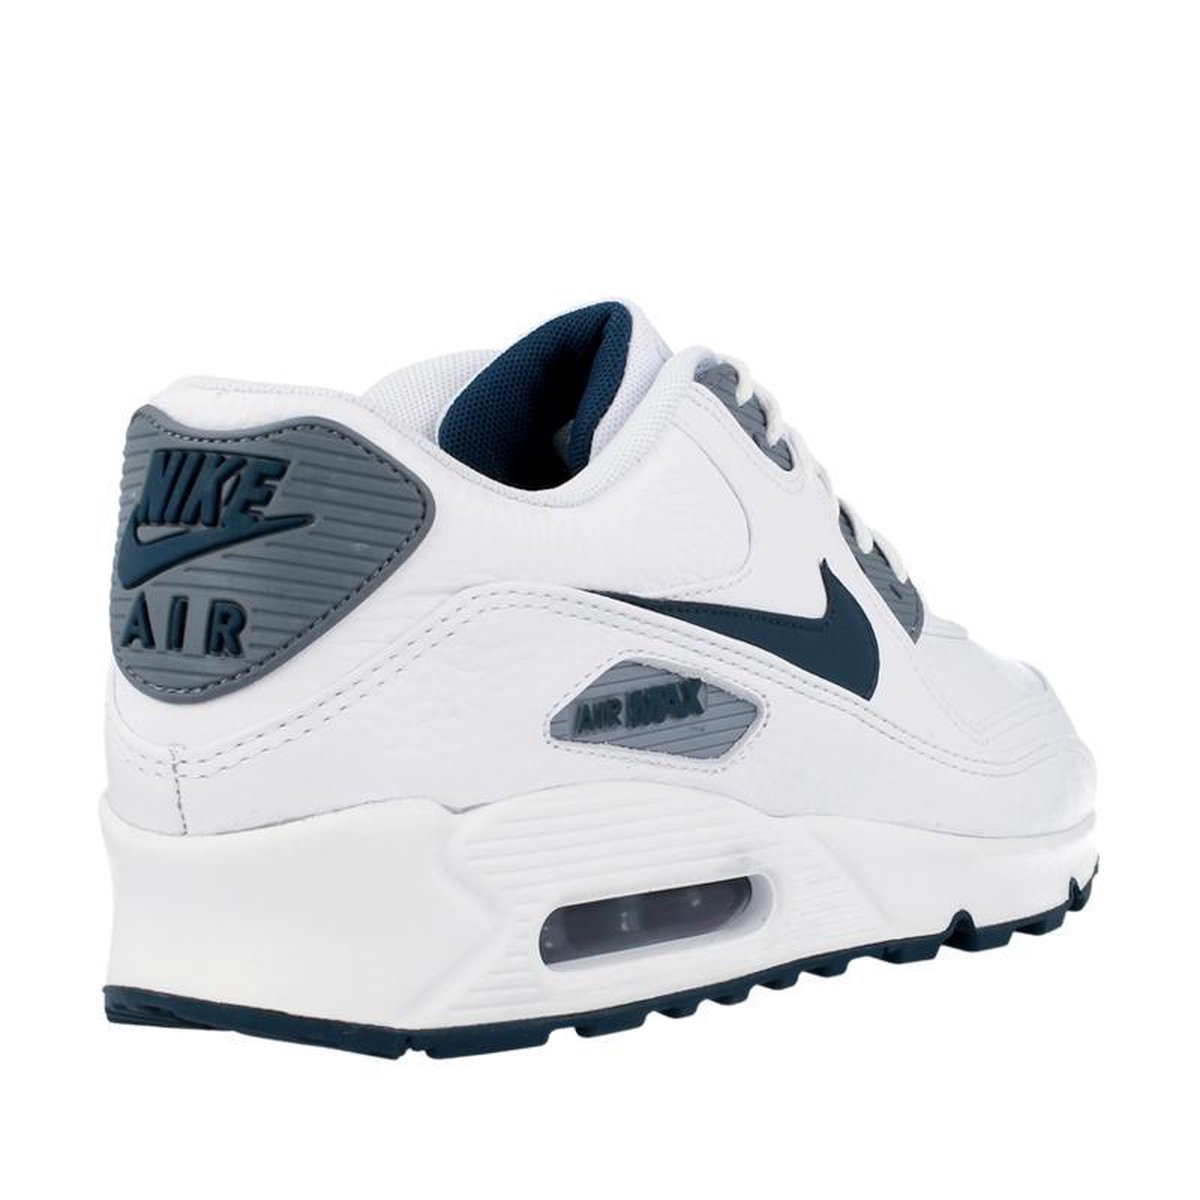 Nike AIR MAX 90 LTR White Space Magnet Grey Leather 652980 101 Wit;Grijs maat | bol.com